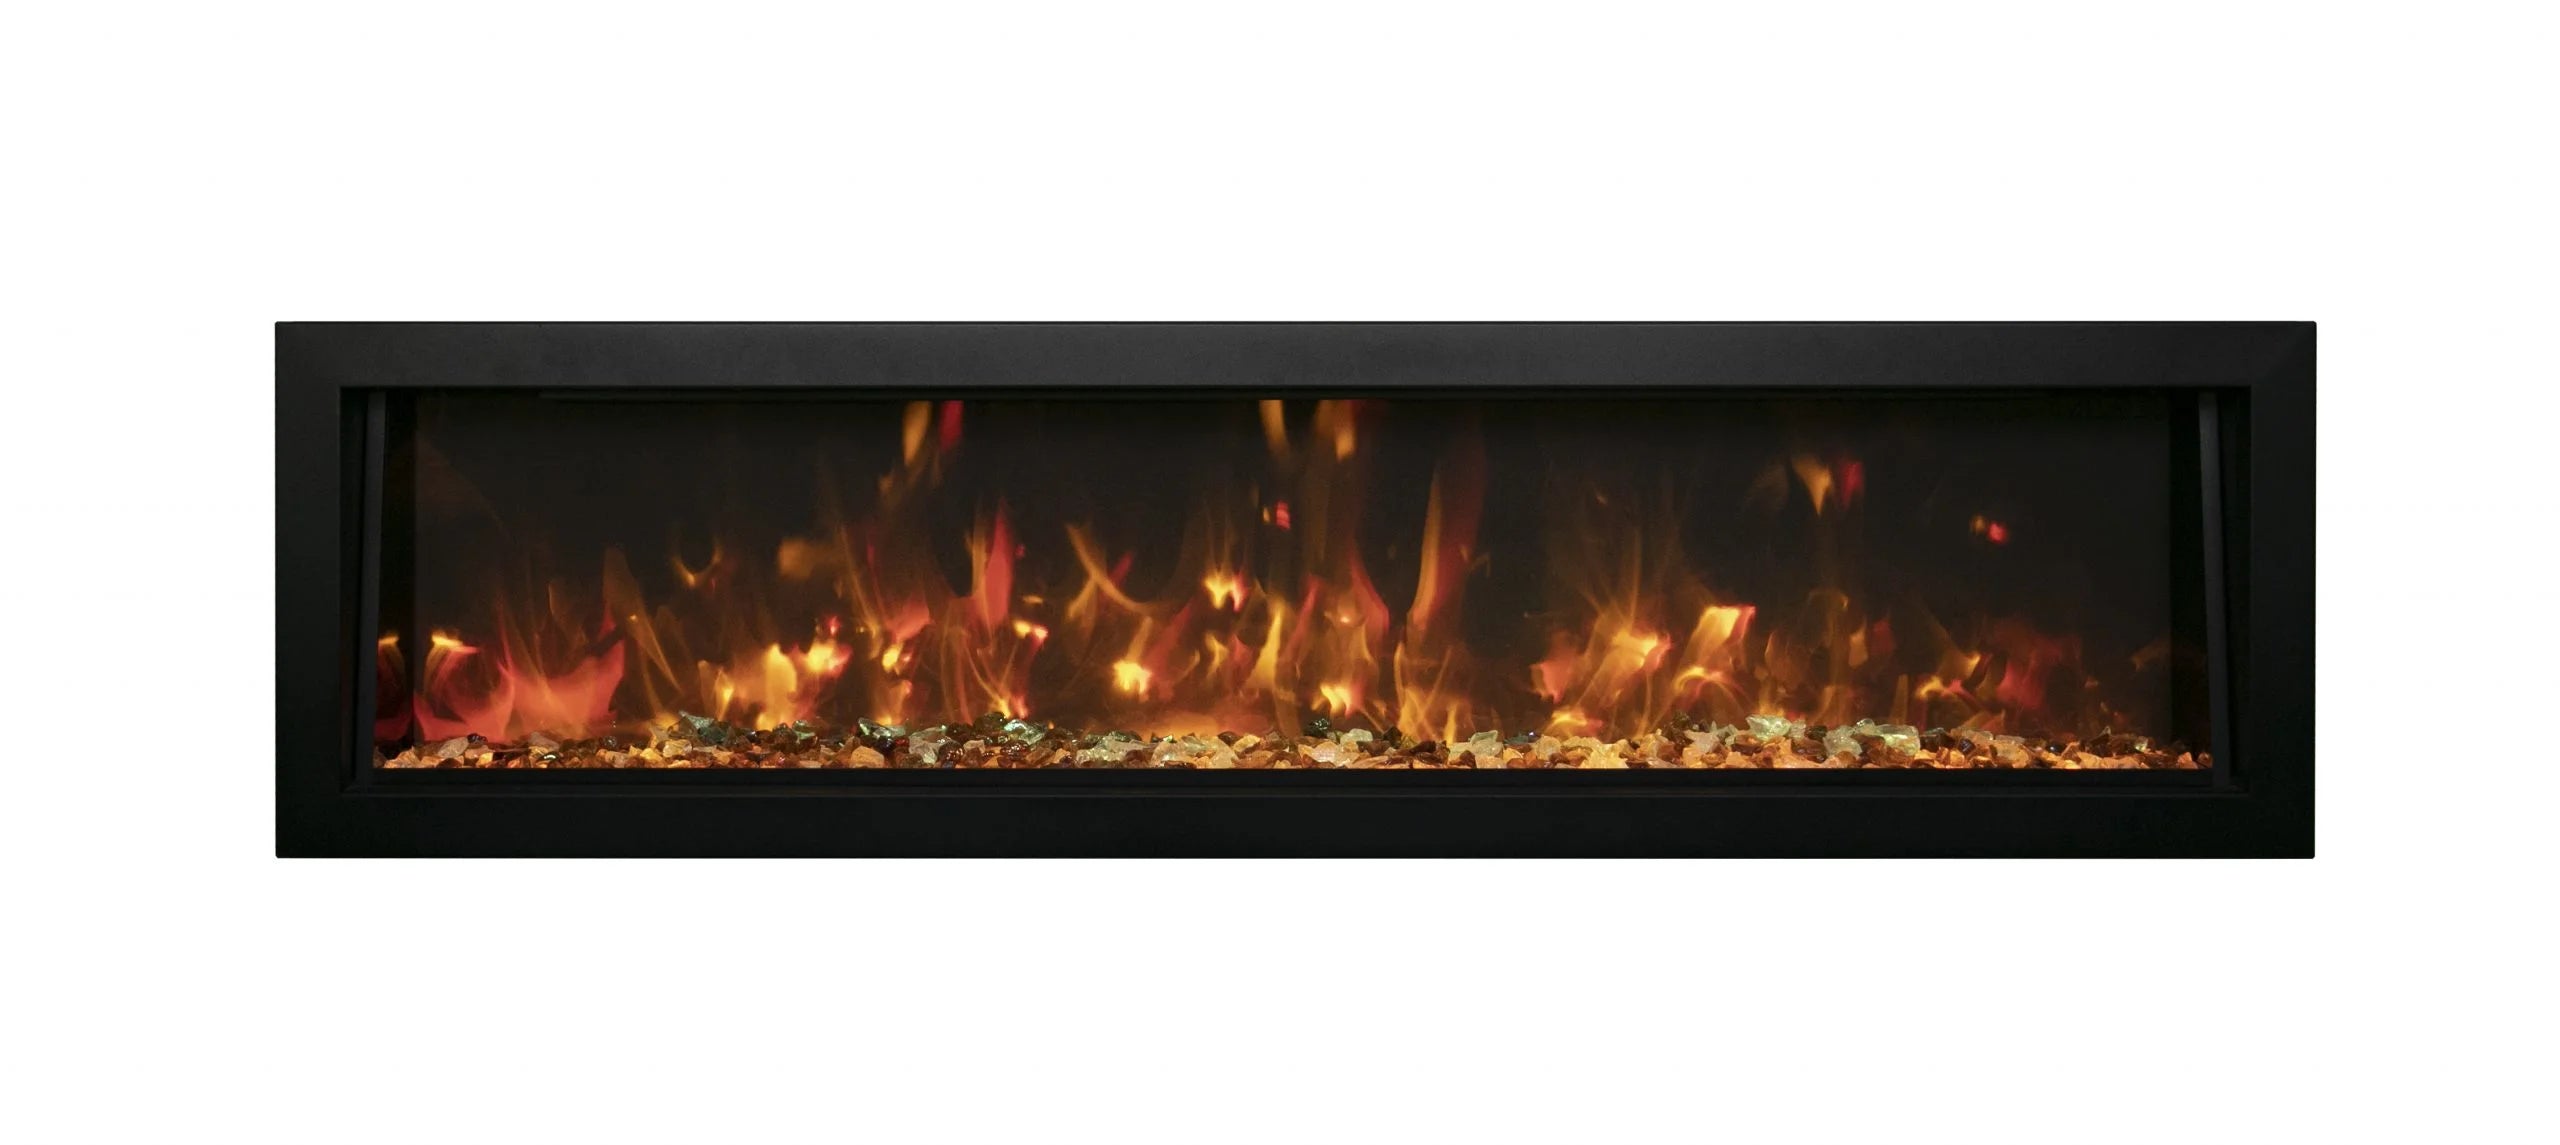 Remii by Amantii 55" Deep Series Built-in Electric Fireplace with Black Steel Surround- 102755-DE- Front View With Mix Brown